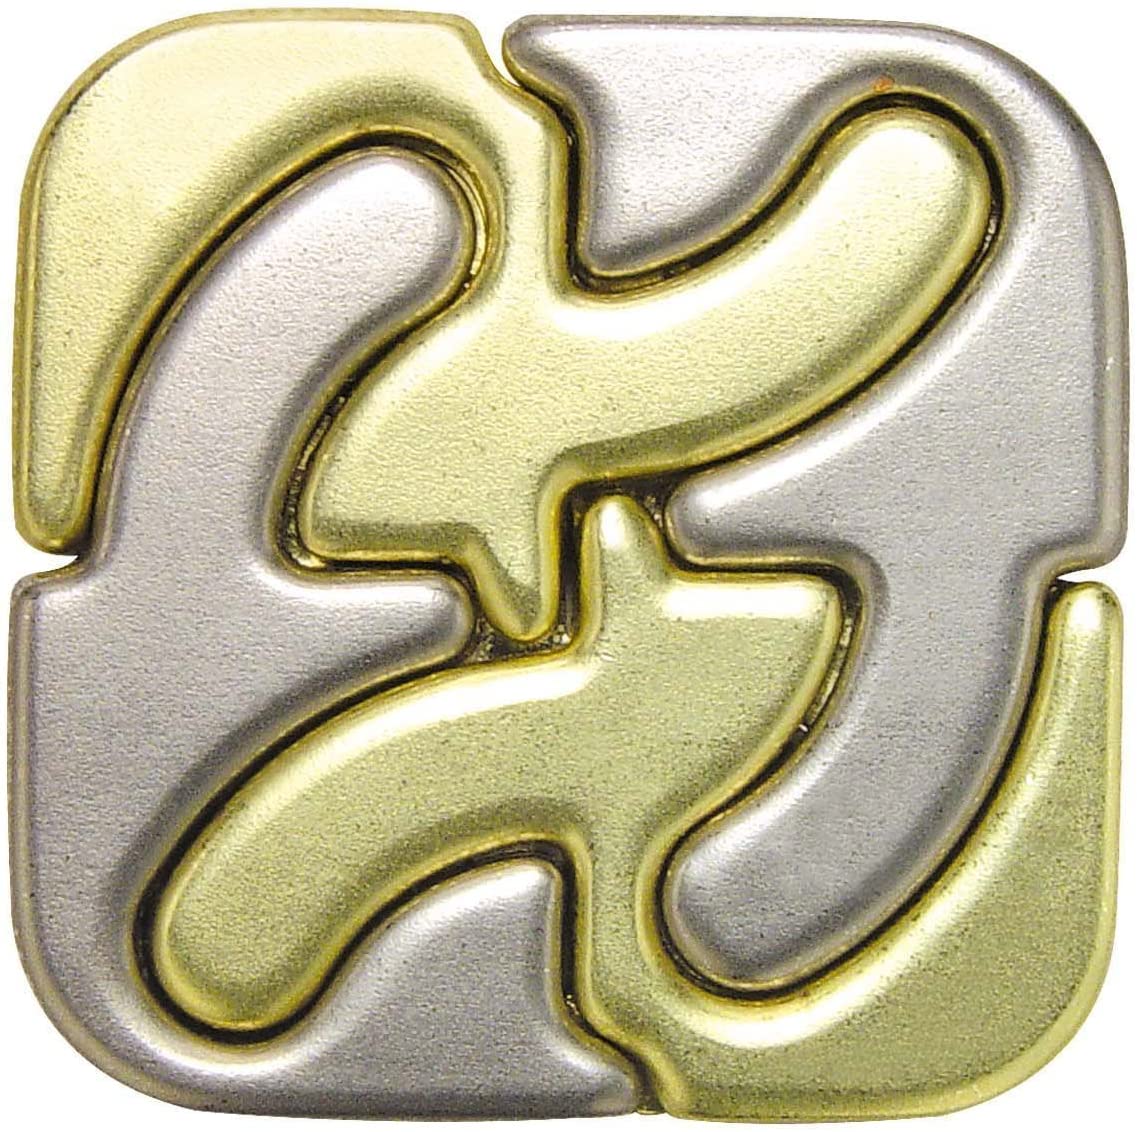 Bartl Huzzle Cast Puzzles, 50 Different High Quality Metal Puzzles for Experts Choose from a range of puzzles..., Square